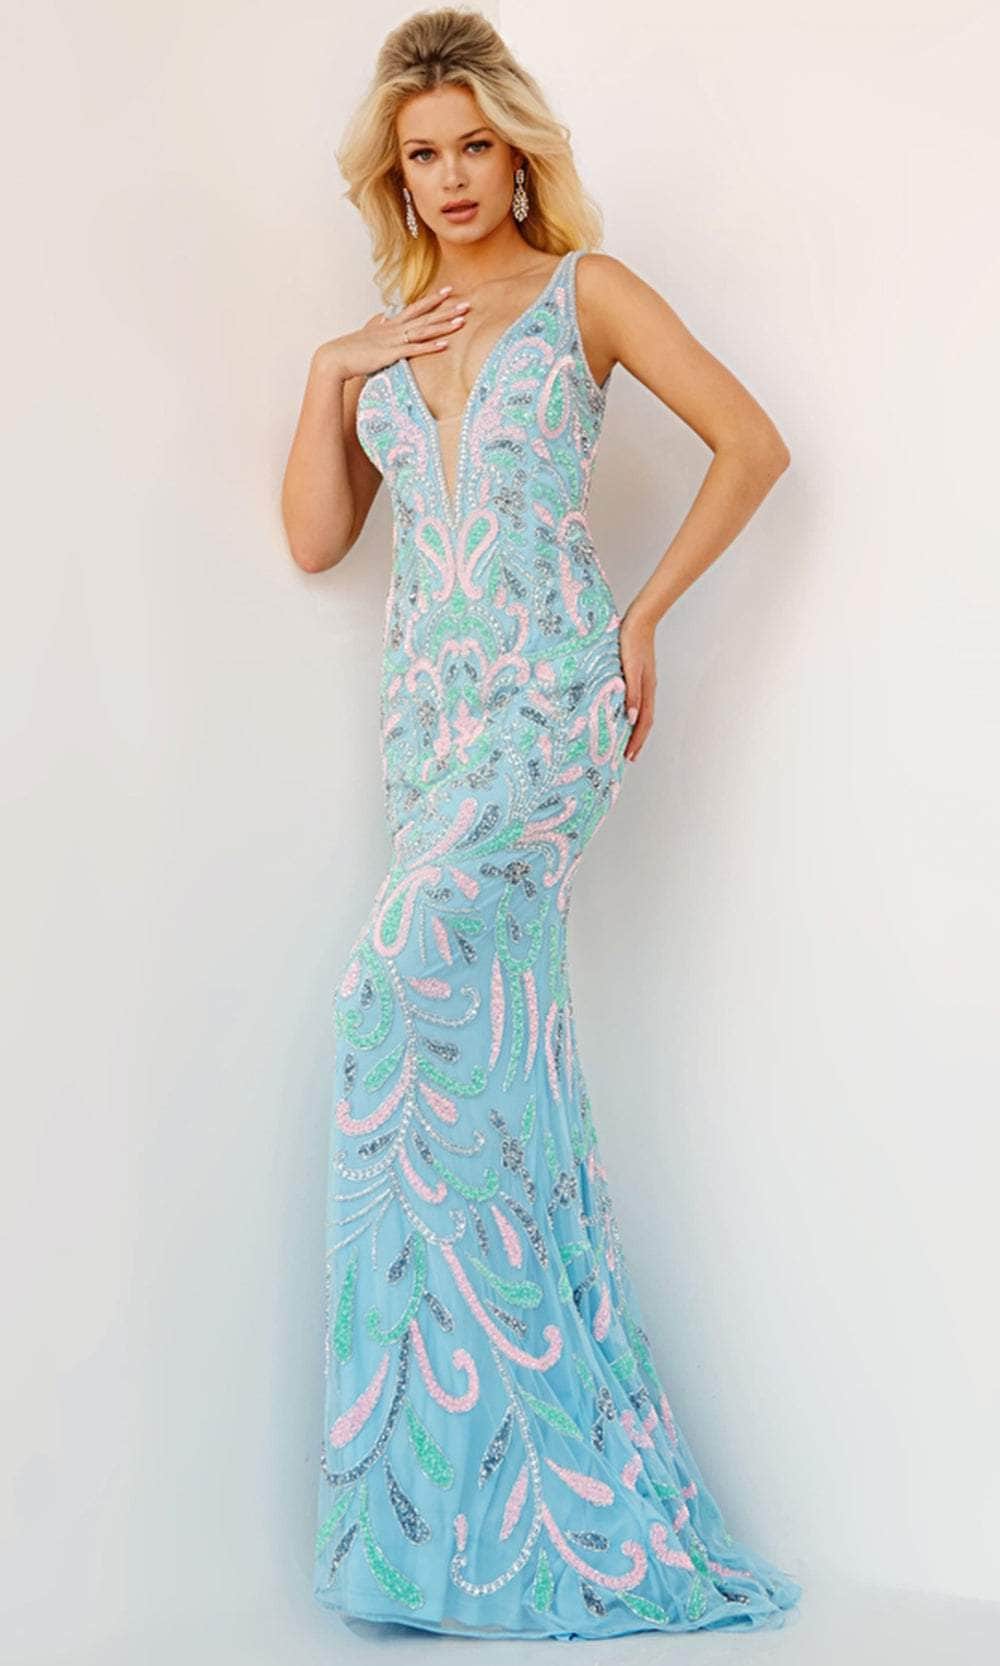 Image of Jovani 23511 - Bejeweled Allover Plunging Gown